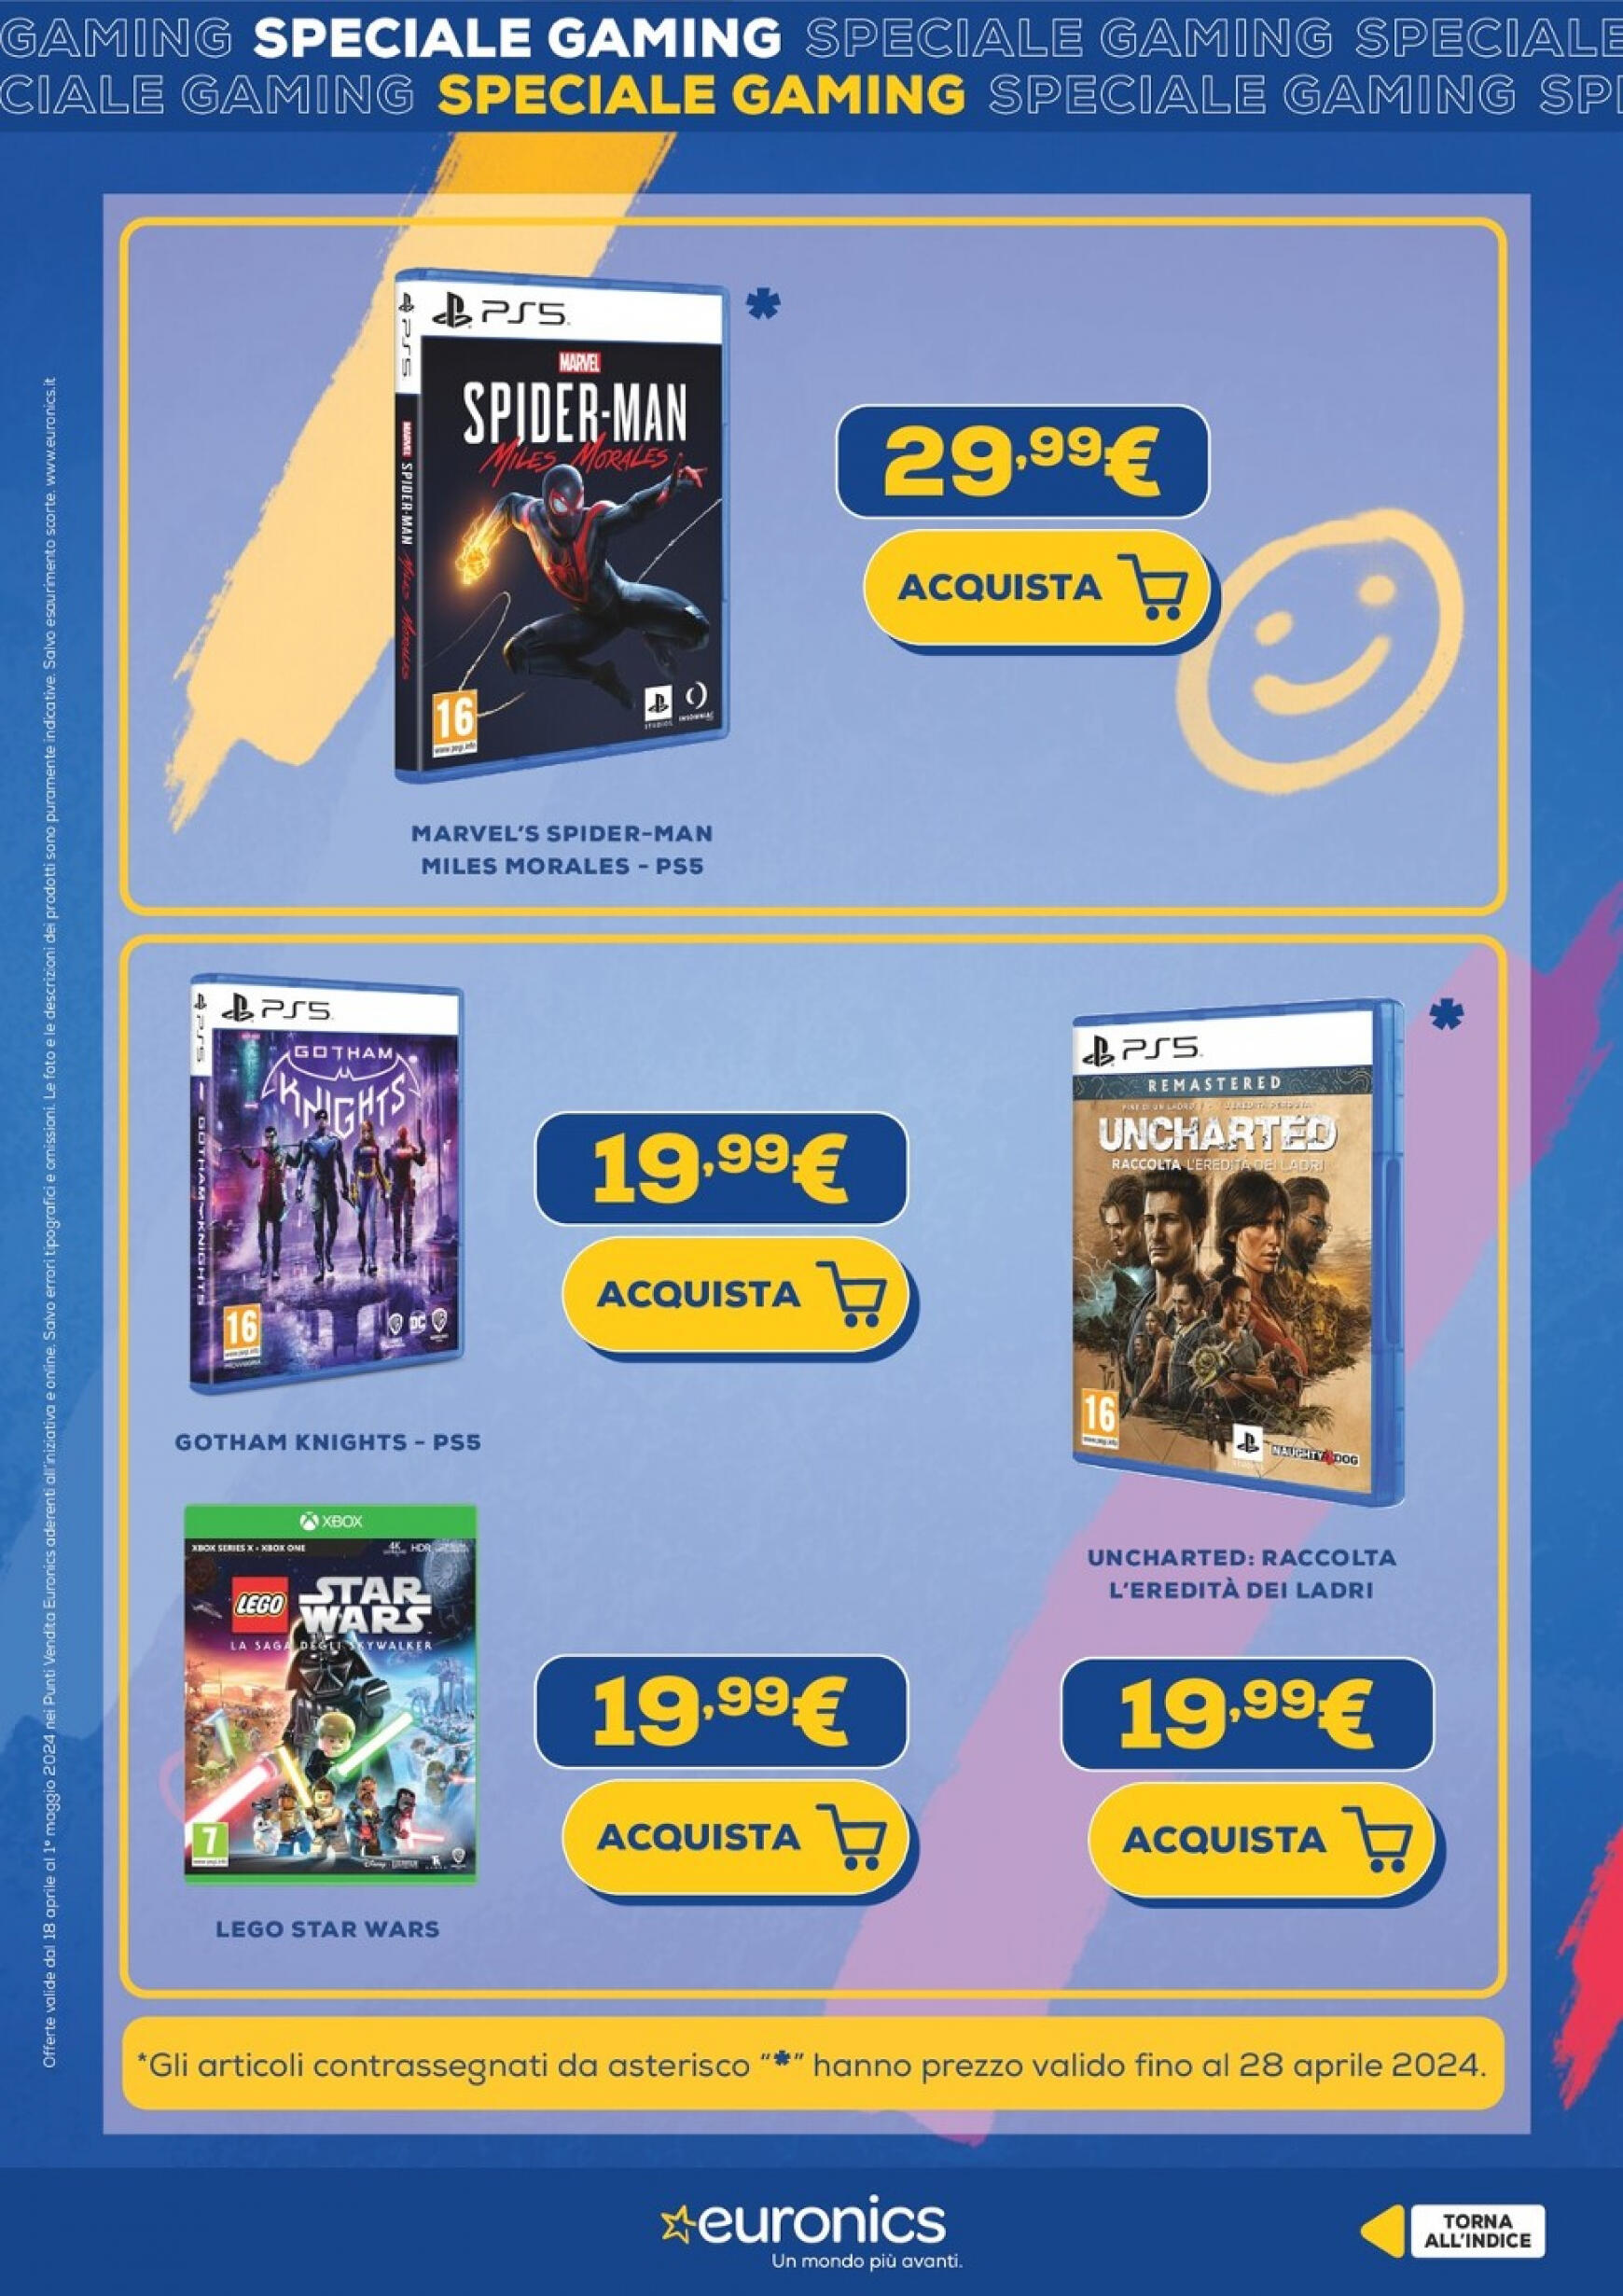 euronics - Nuovo volantino Euronics - Speciale Gaming 18.04. - 01.05. - page: 31